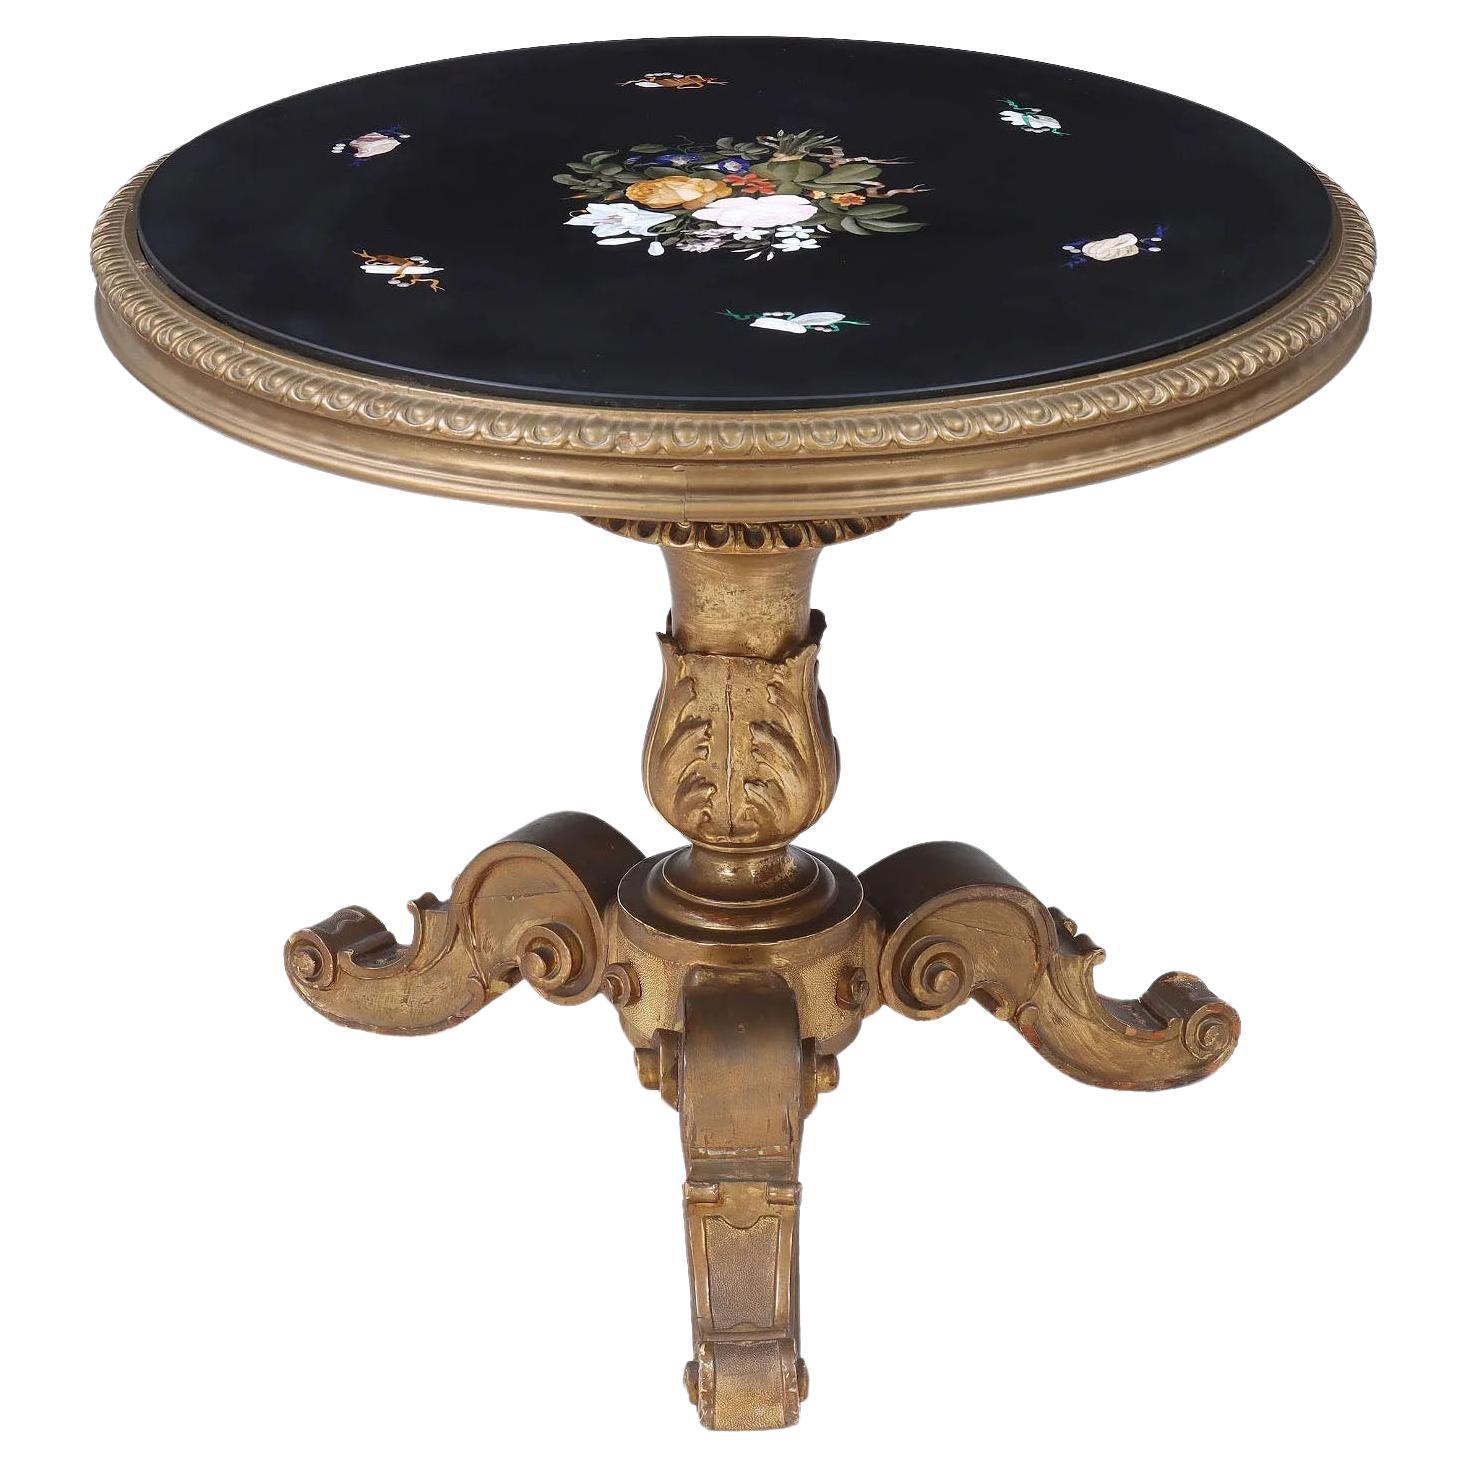 An Italian 19th Century Florentine Pietra Dura Inlaid Table on a Giltwood Stand